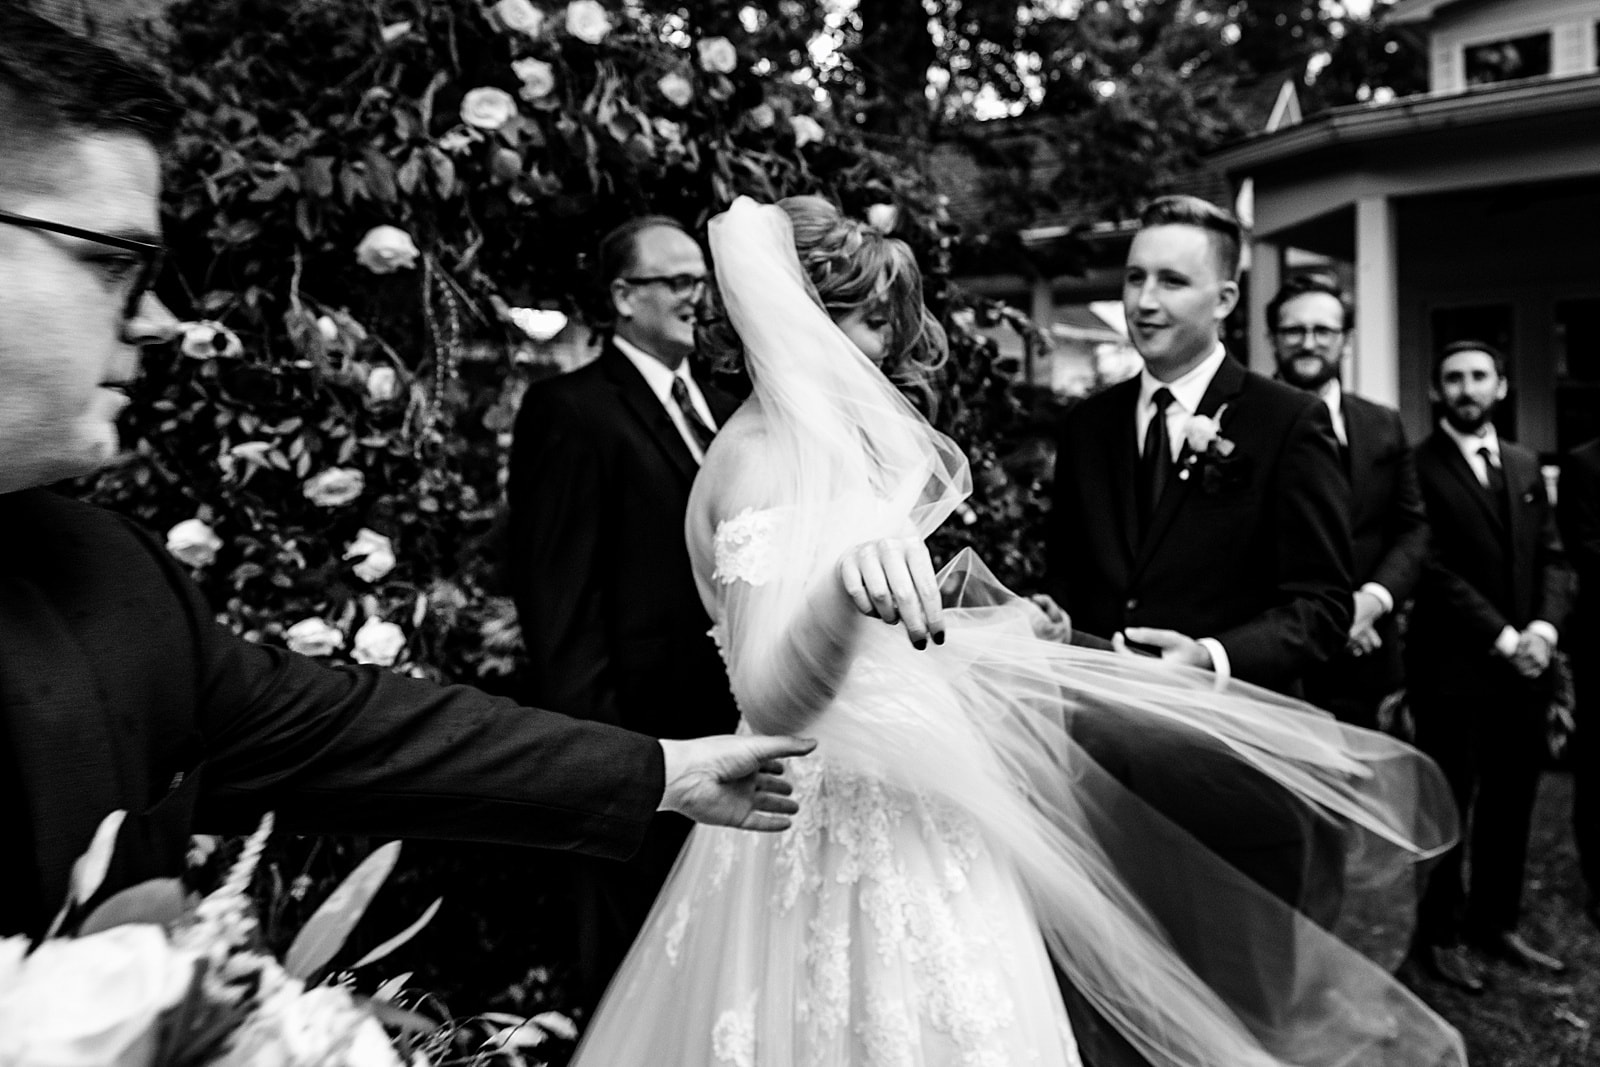 wind tries to take control of bride's veil at this wedding ceremony